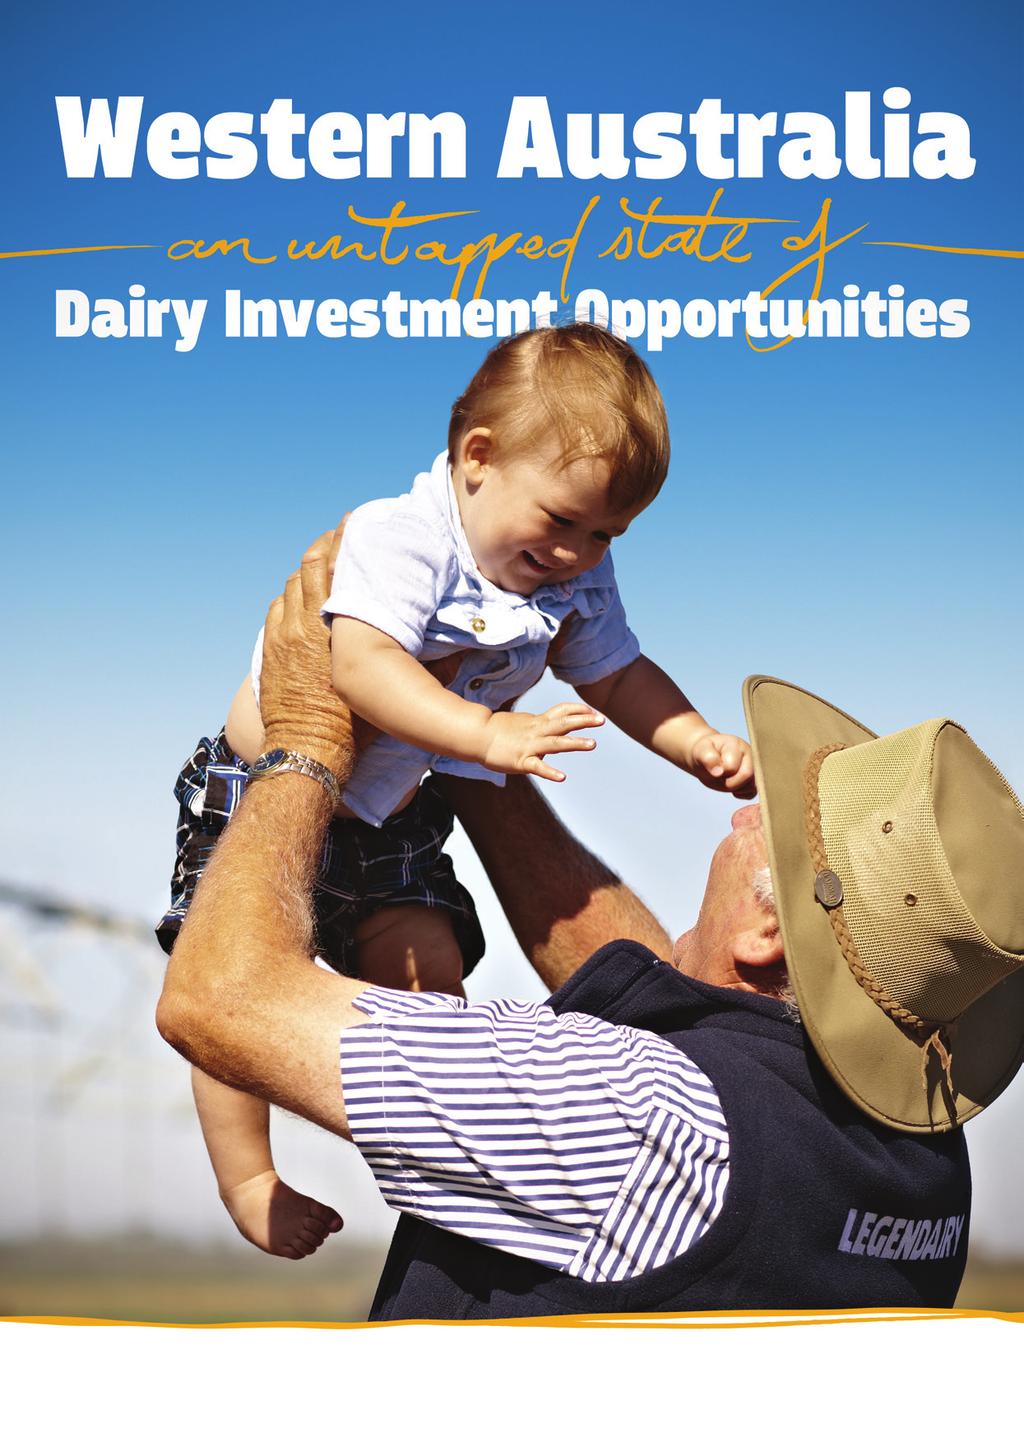 Prepared by Western Dairy in conjunction with the Department of Agriculture WA, WAFarmers Dairy Section,